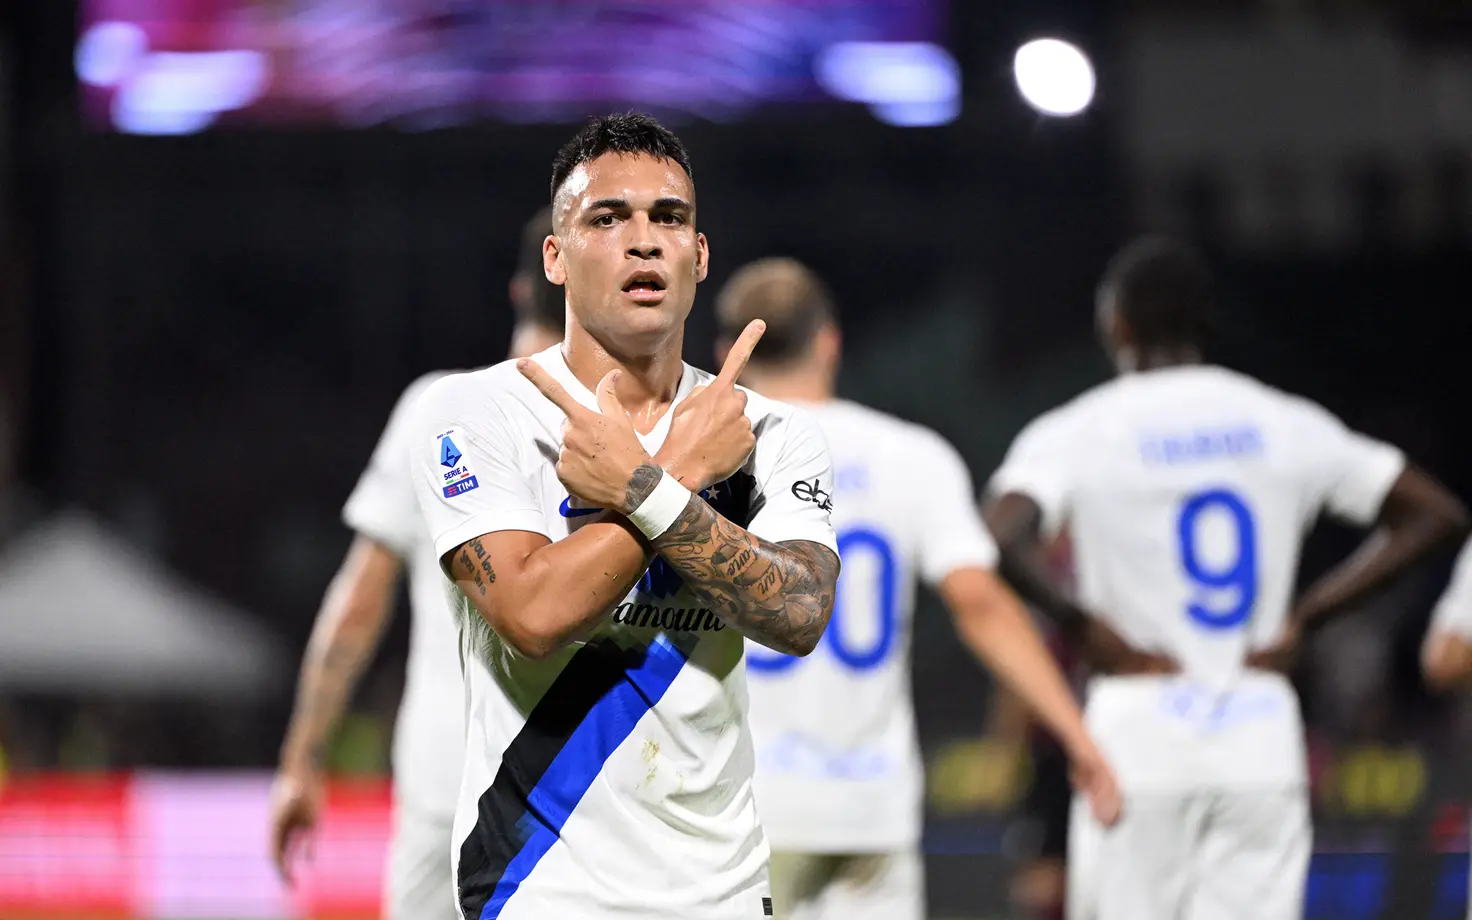 Lautaro Martinez boosted his seasonal numbers by scoring four goals off the bench against Salernitana. He has hit the net nine times in seven rounds.